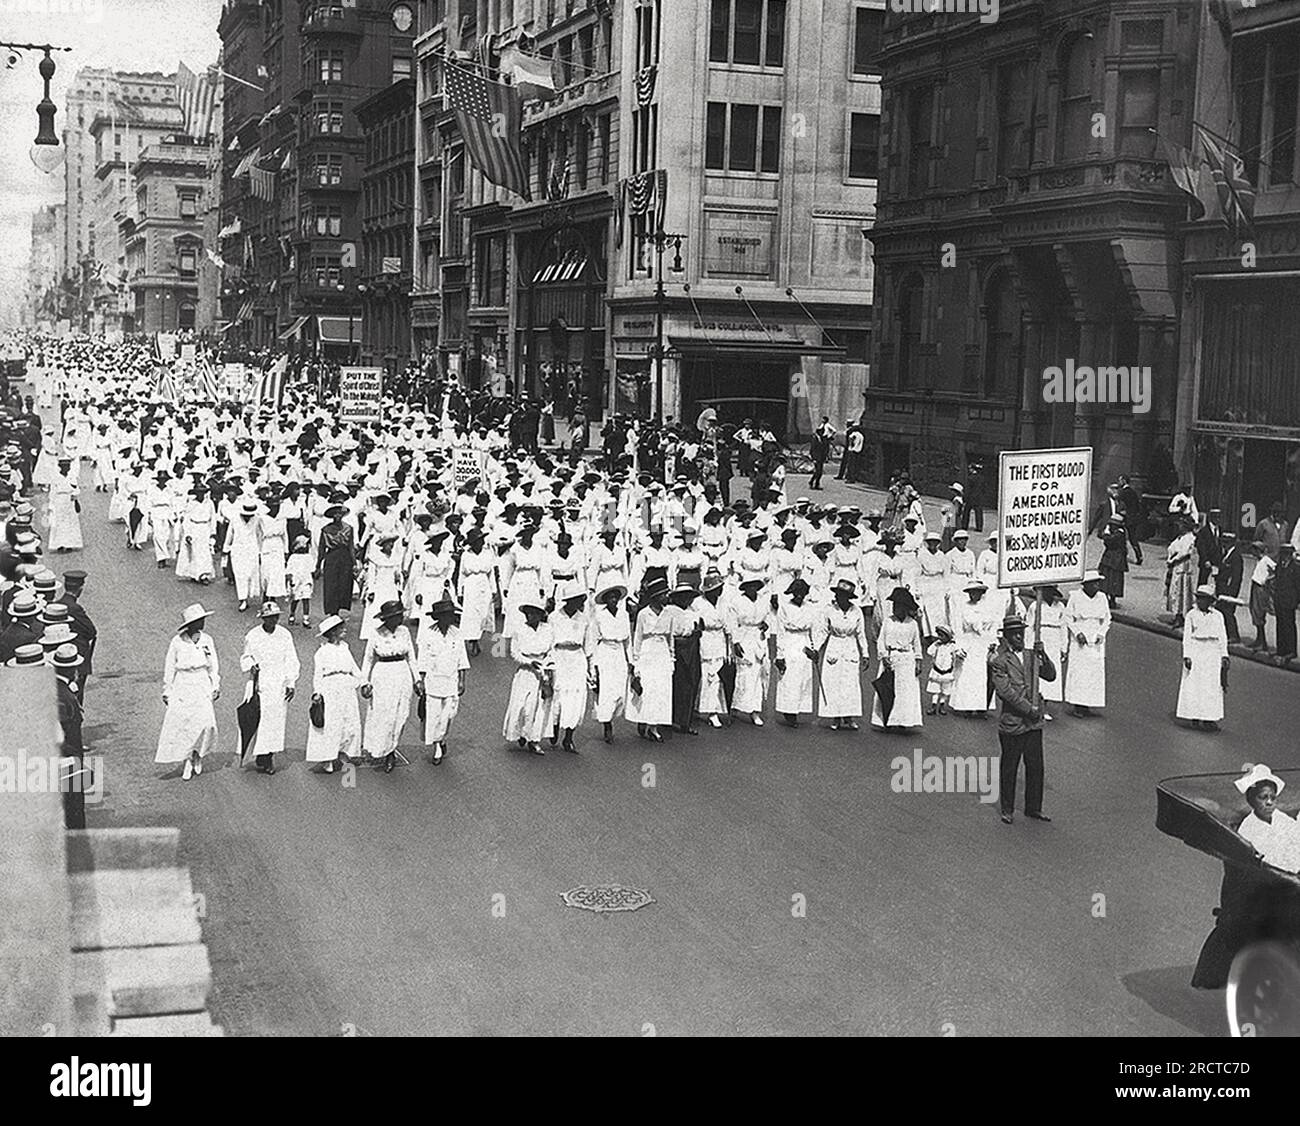 New York, New York: 1917:  A silent march to protest the police’s treatment of blacks during riots in East St. Louis. They marched down Fifth Avenue on that summer Saturday without saying a word. They chanted no chants, sang no protest songs. The only sounds were the disconcertingly mournful thuds of muffled drums — and, of course, the marchers’ footsteps on the hot pavement. It was a “parade of silent protest'. Stock Photo